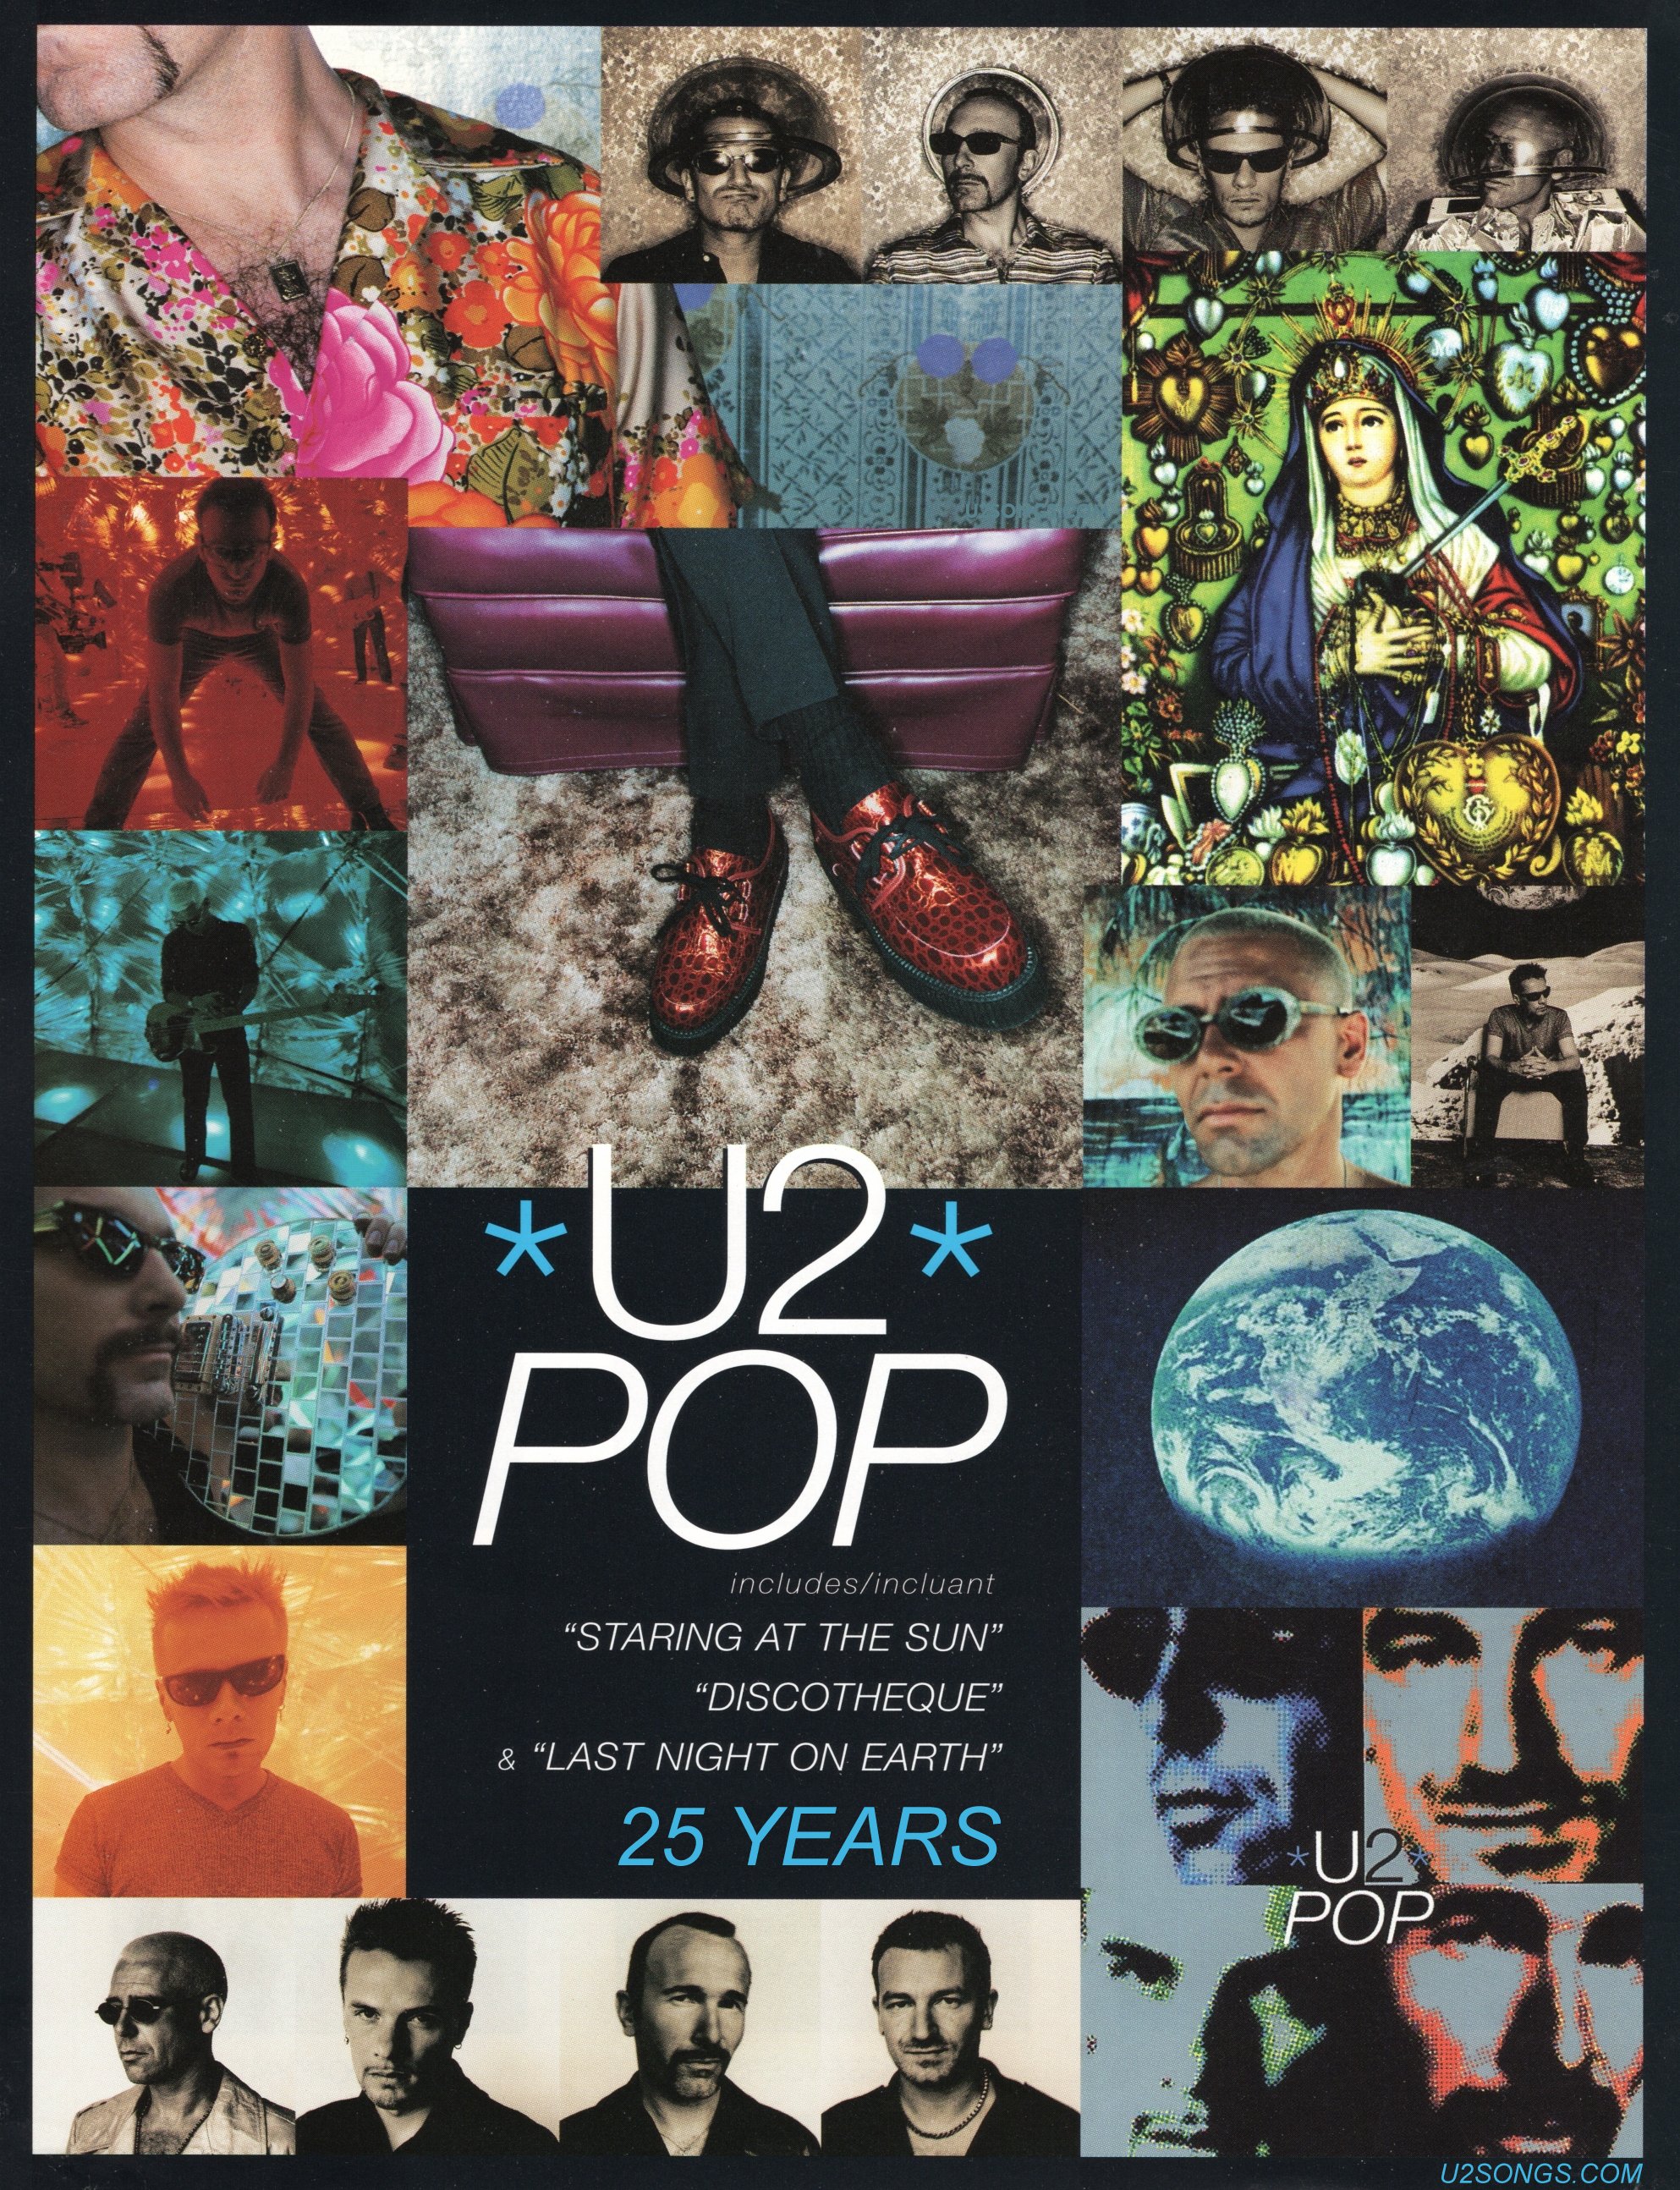 werkgelegenheid plek Brullen U2Songs.com on Twitter: "Released March 3, 1997, "Pop" celebrates its 25th  anniversary!! We'd love to hear what your favourite songs from the album  are, and any other stories you care to share!